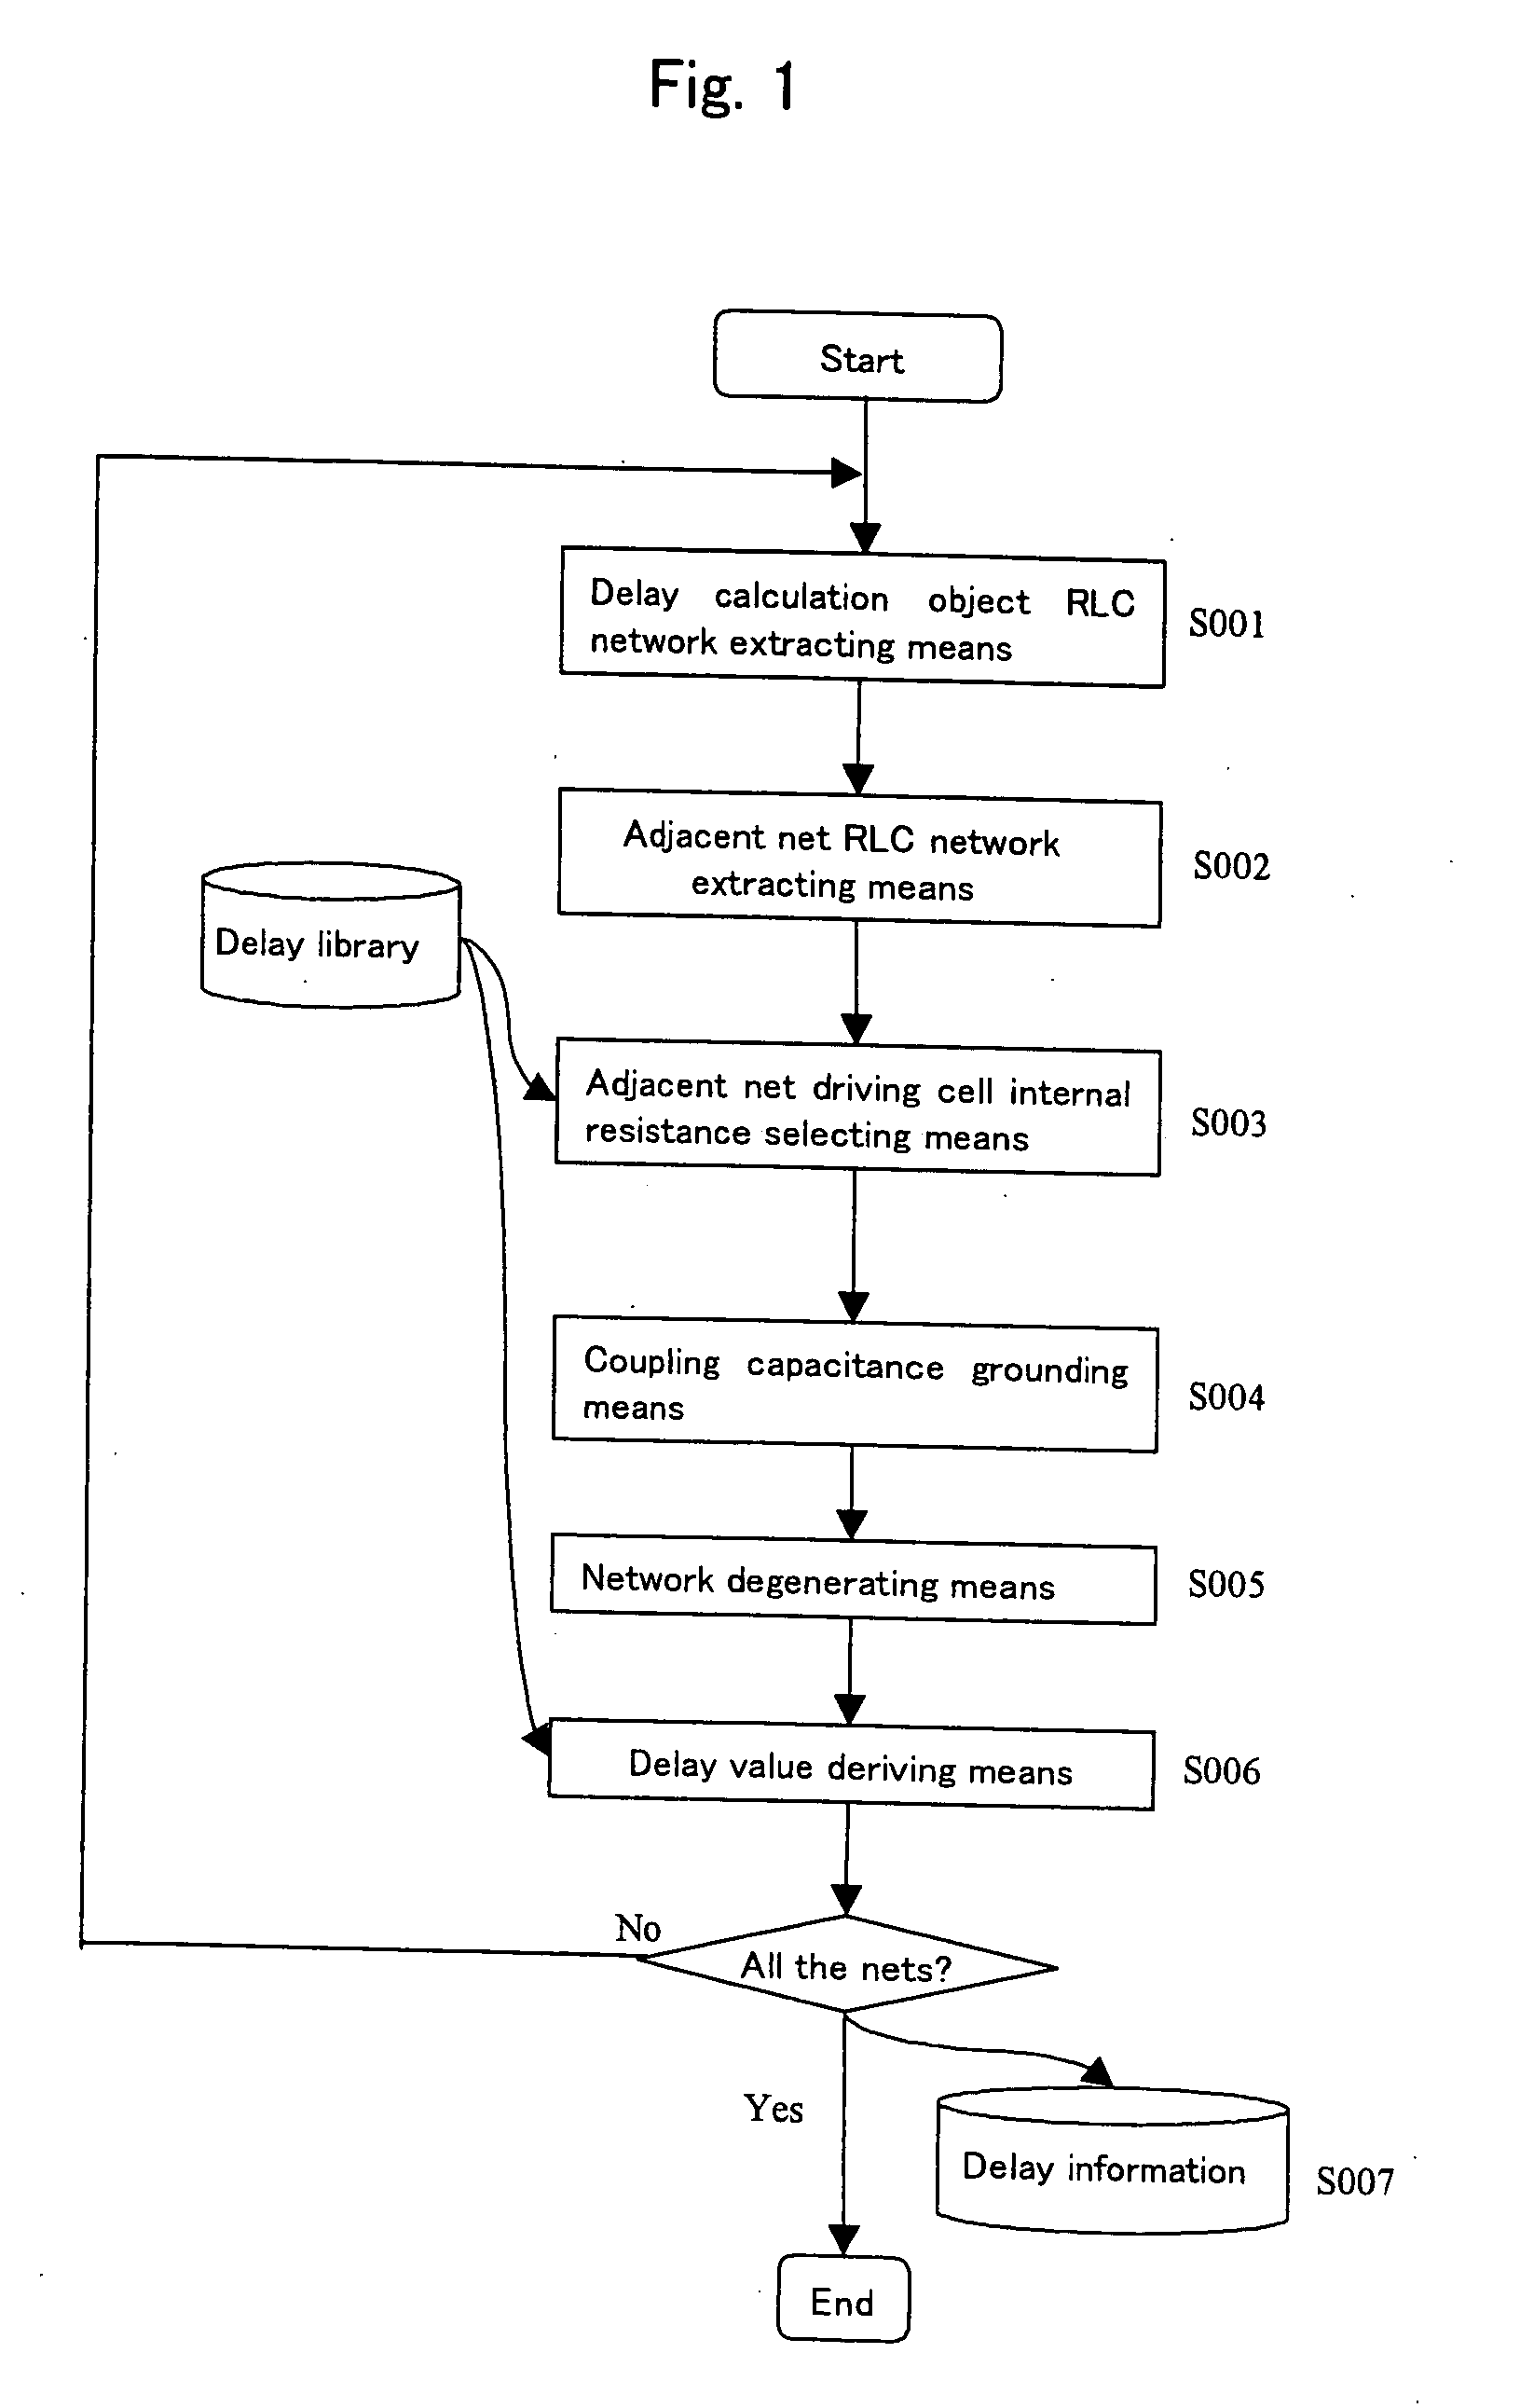 Delay calculation method, timing analysis method, calculation object network approximation method, and delay control method